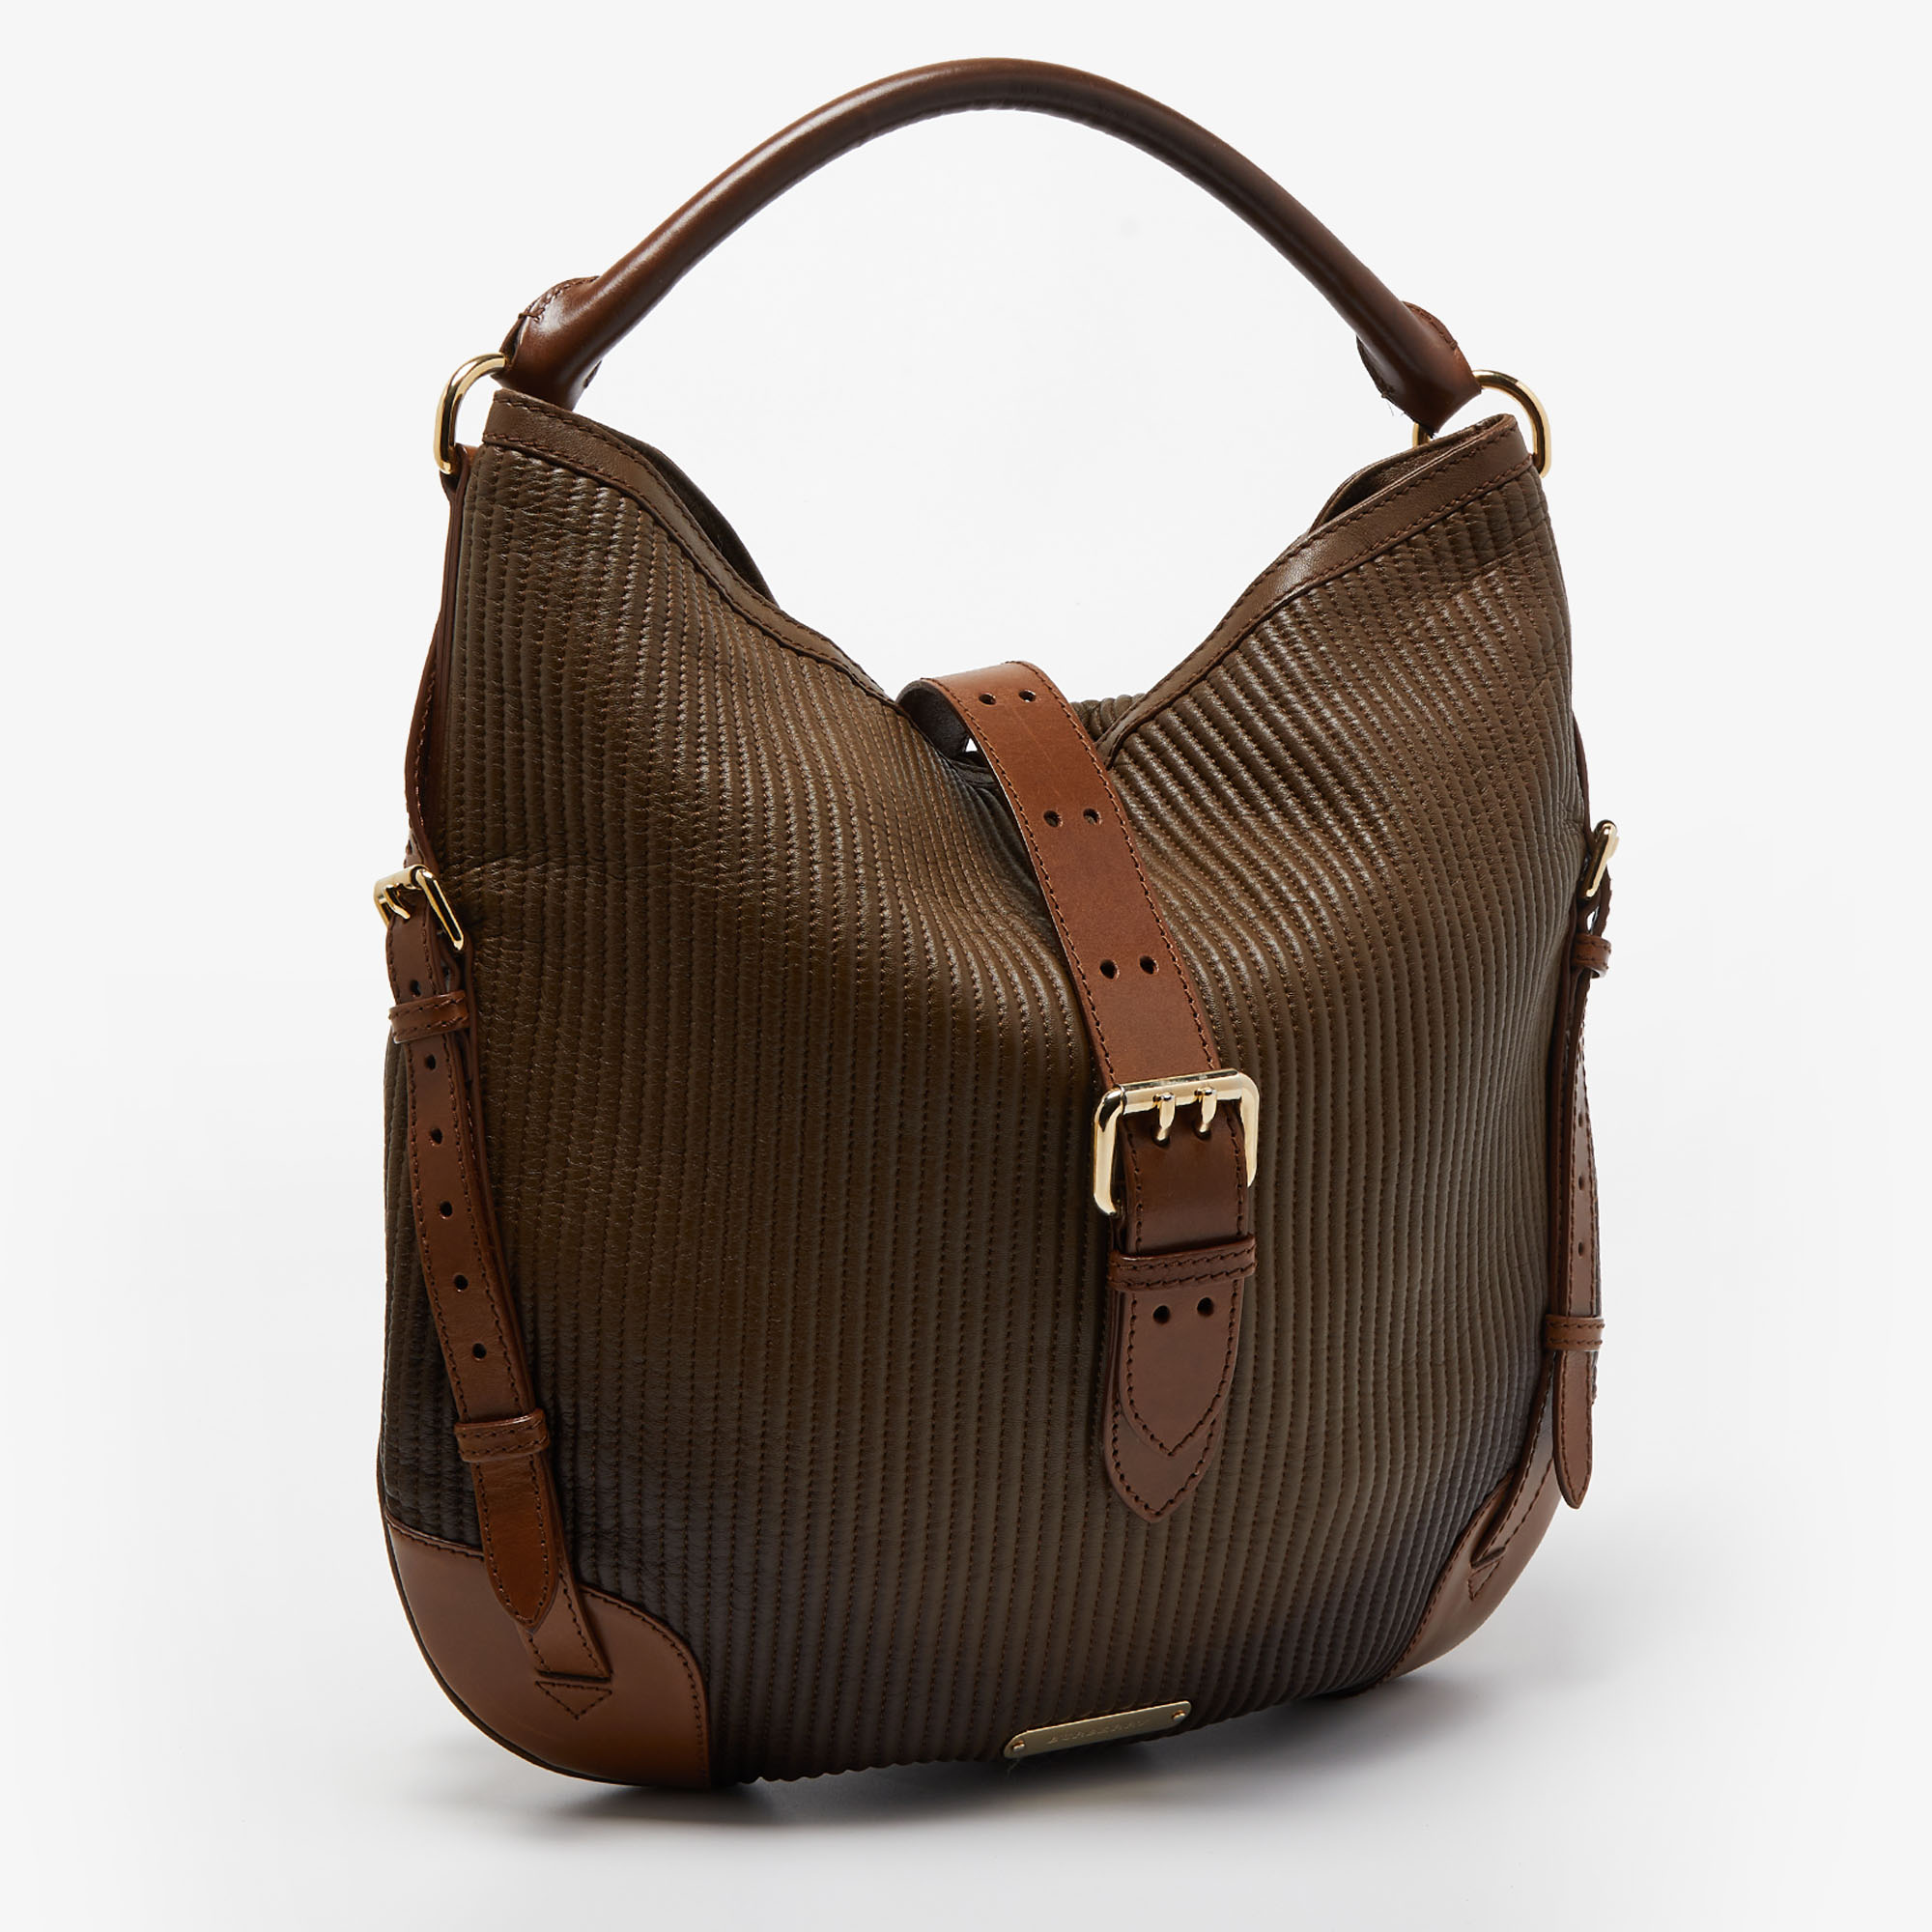 Burberry Brown Quilted Leather Dunloe Hobo